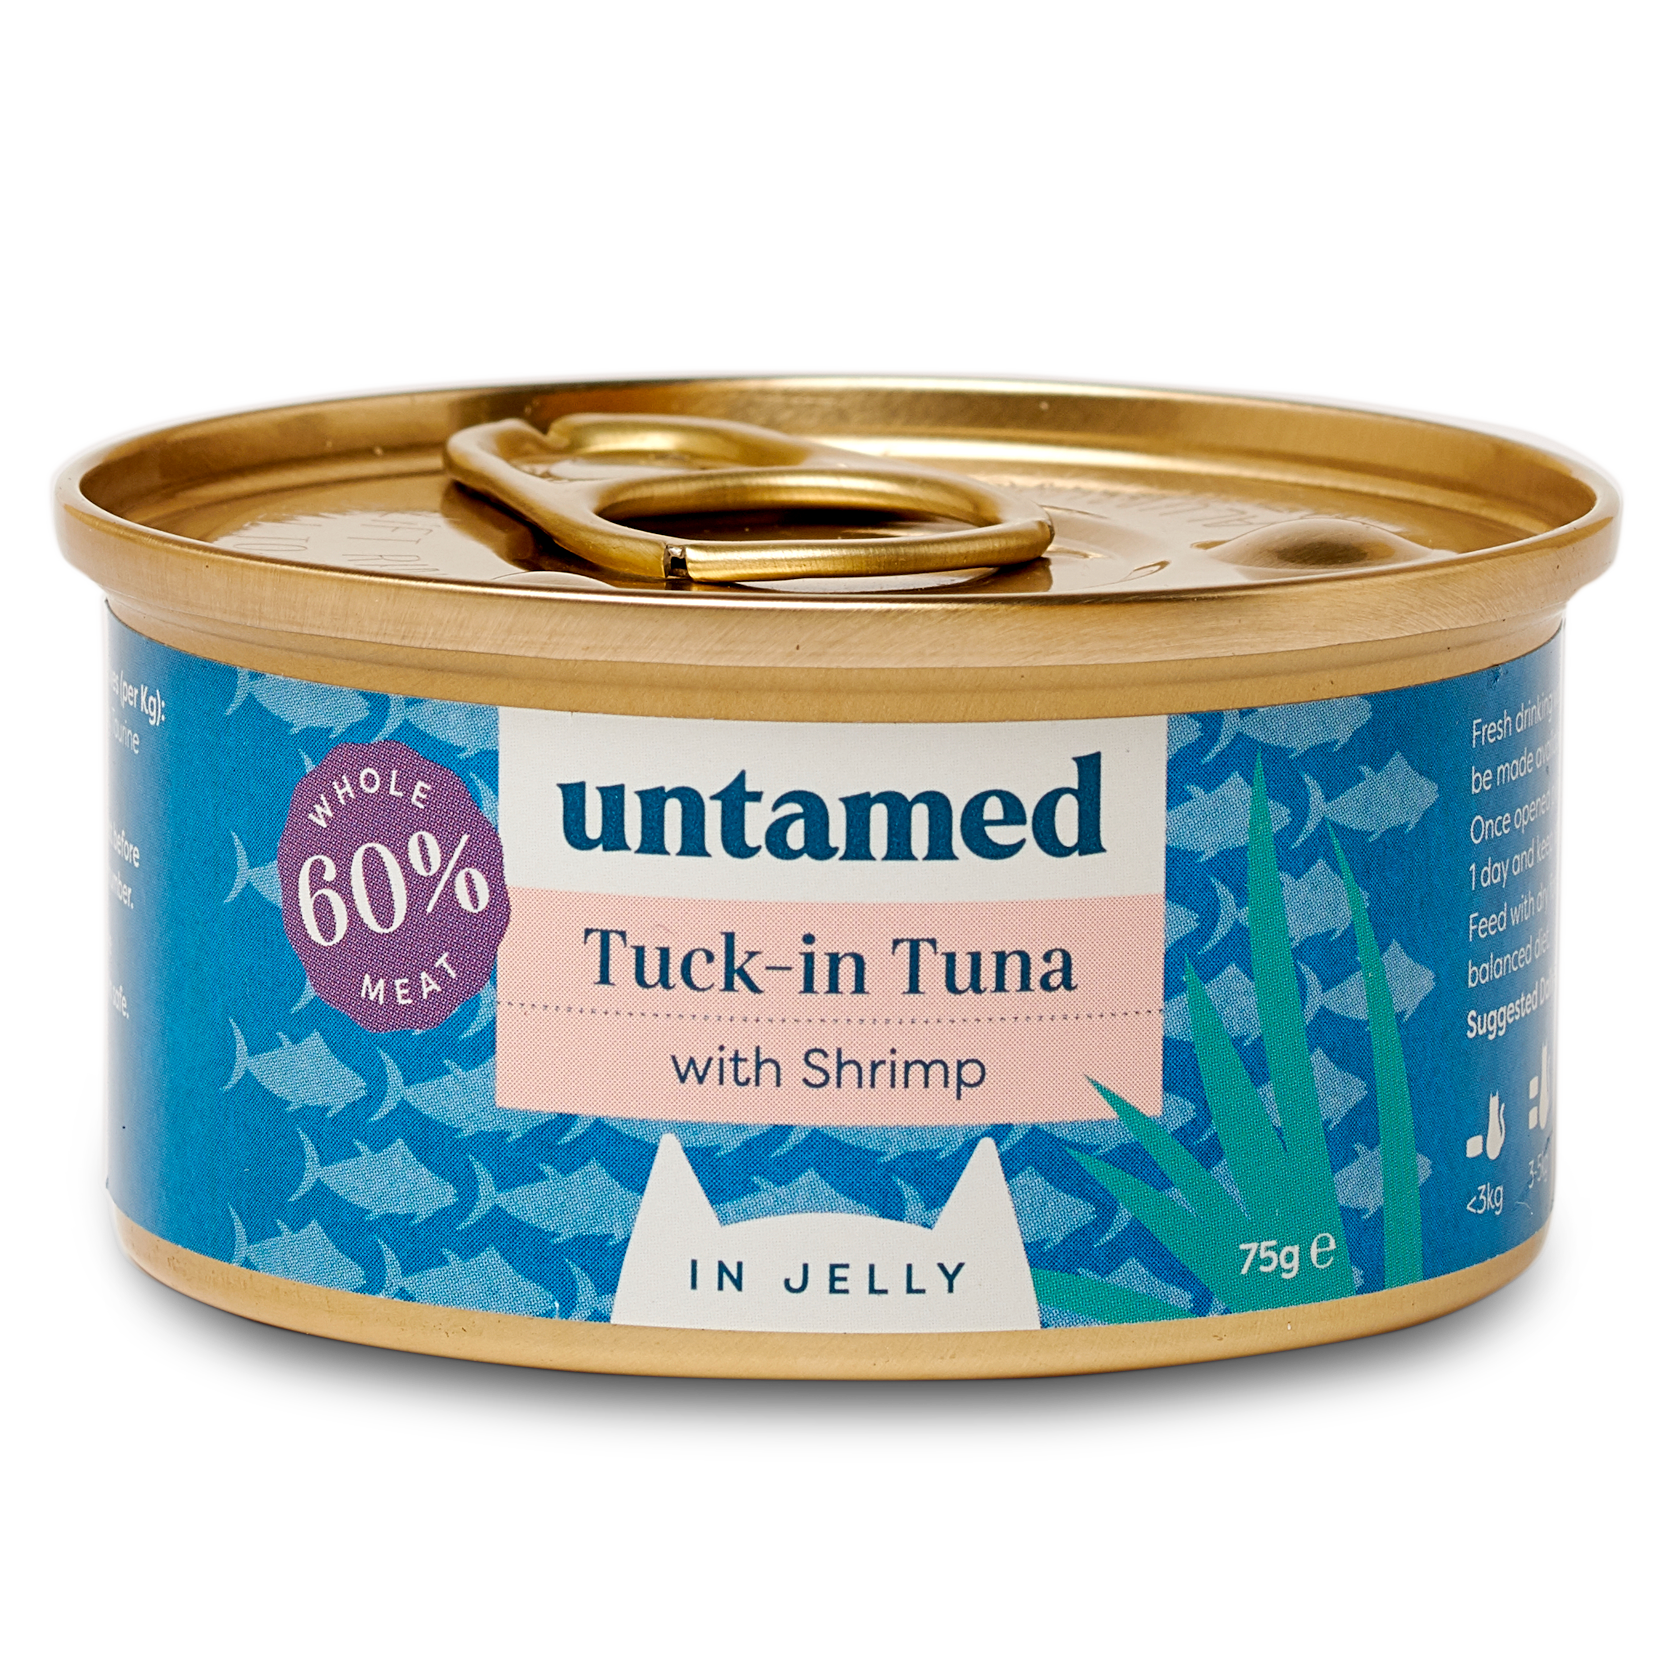 Tuck-in Tuna with Shrimp in Jelly